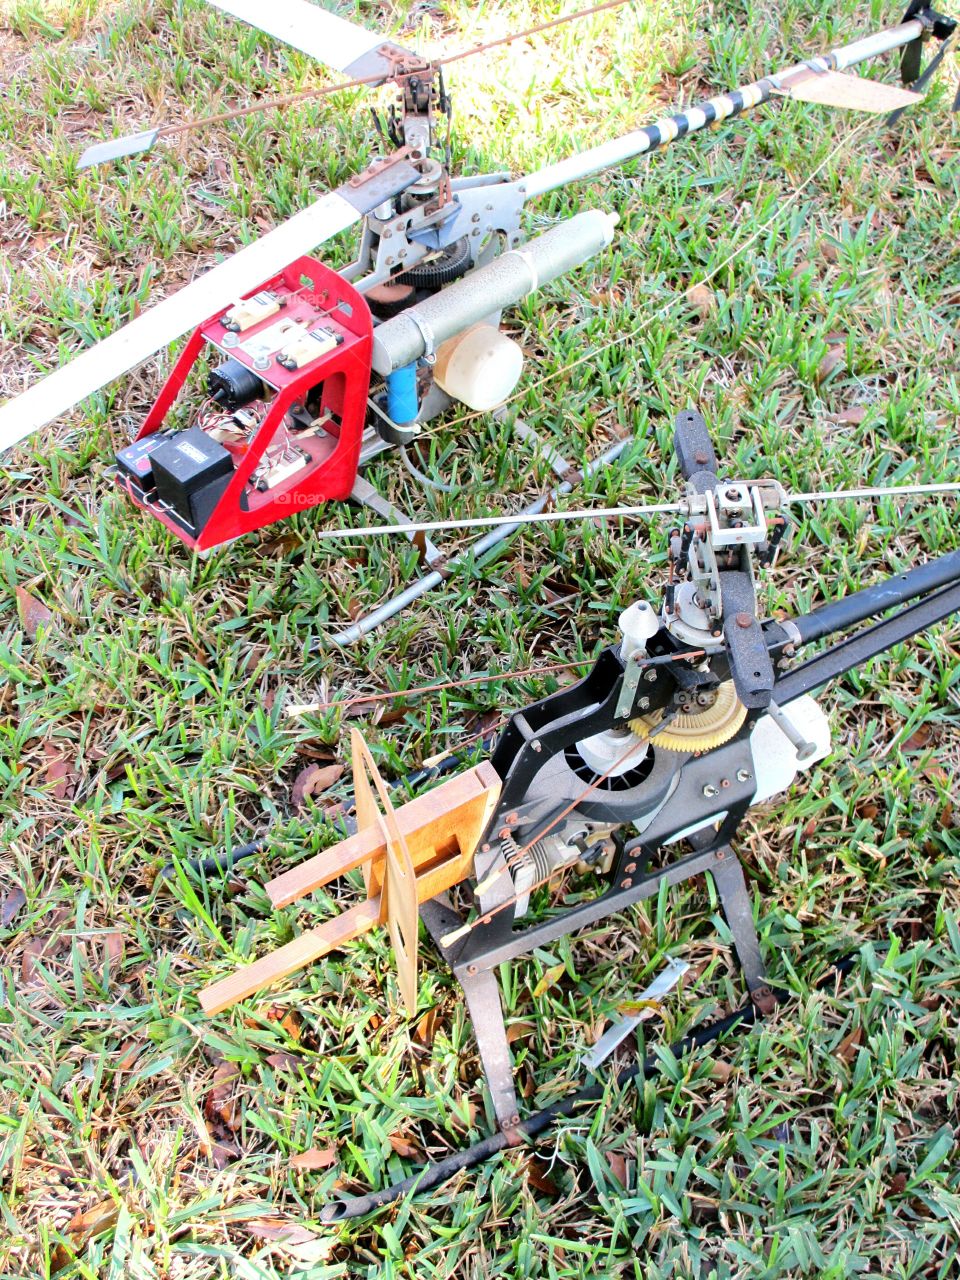 Radio controlled helicopters, the original drones